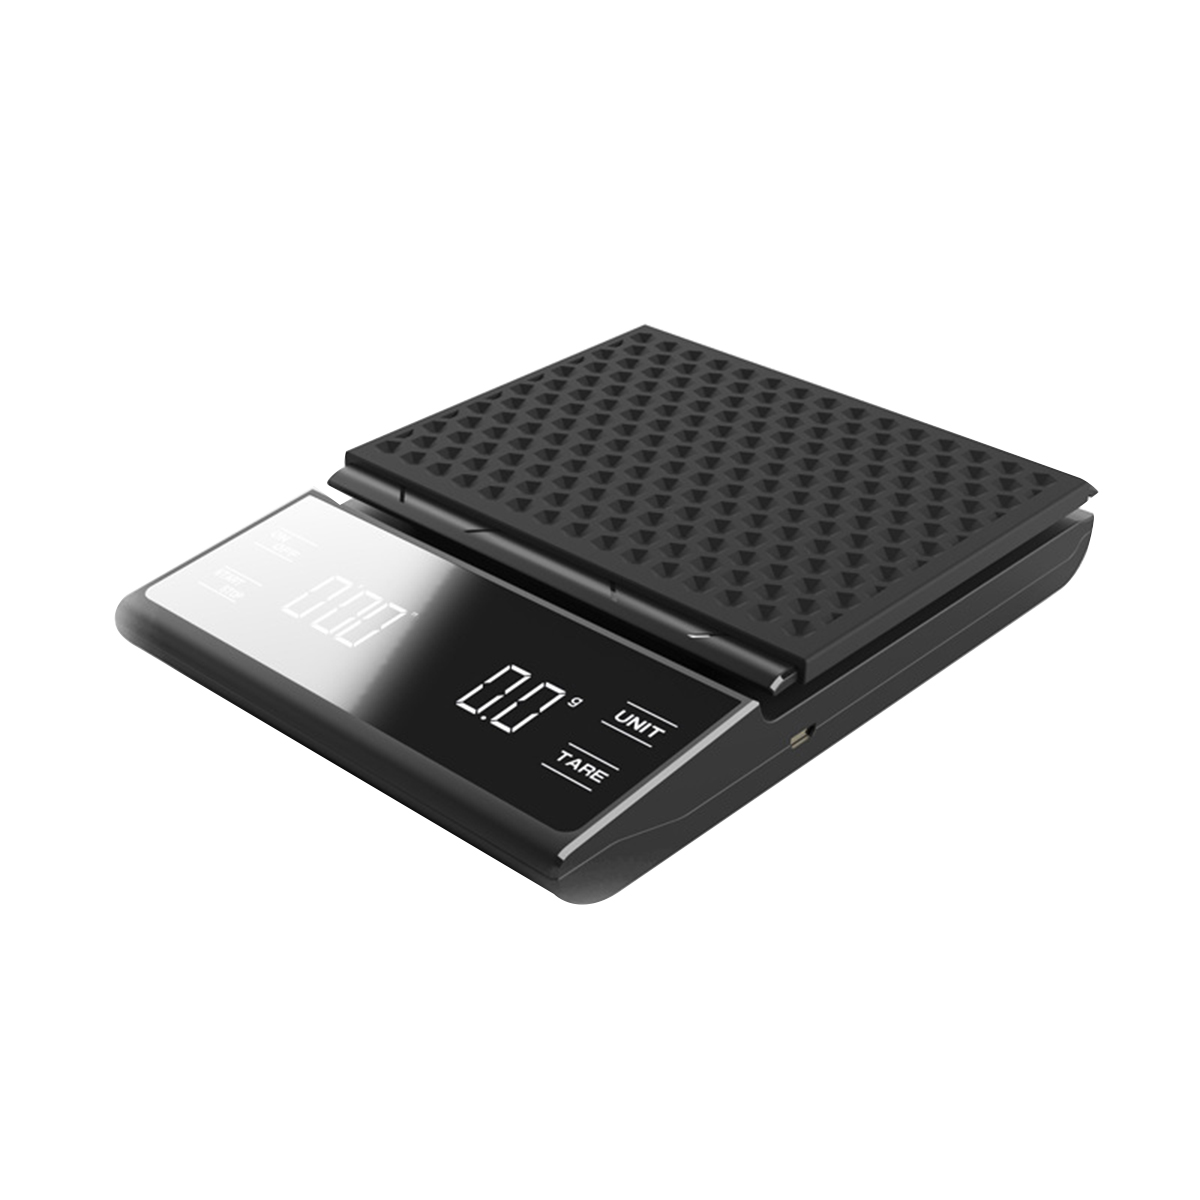 High Precision Sensor Coffee Electronic Scale Timer Peeling Function Overload Indication Auto Close Multifunction Kitchen Tools